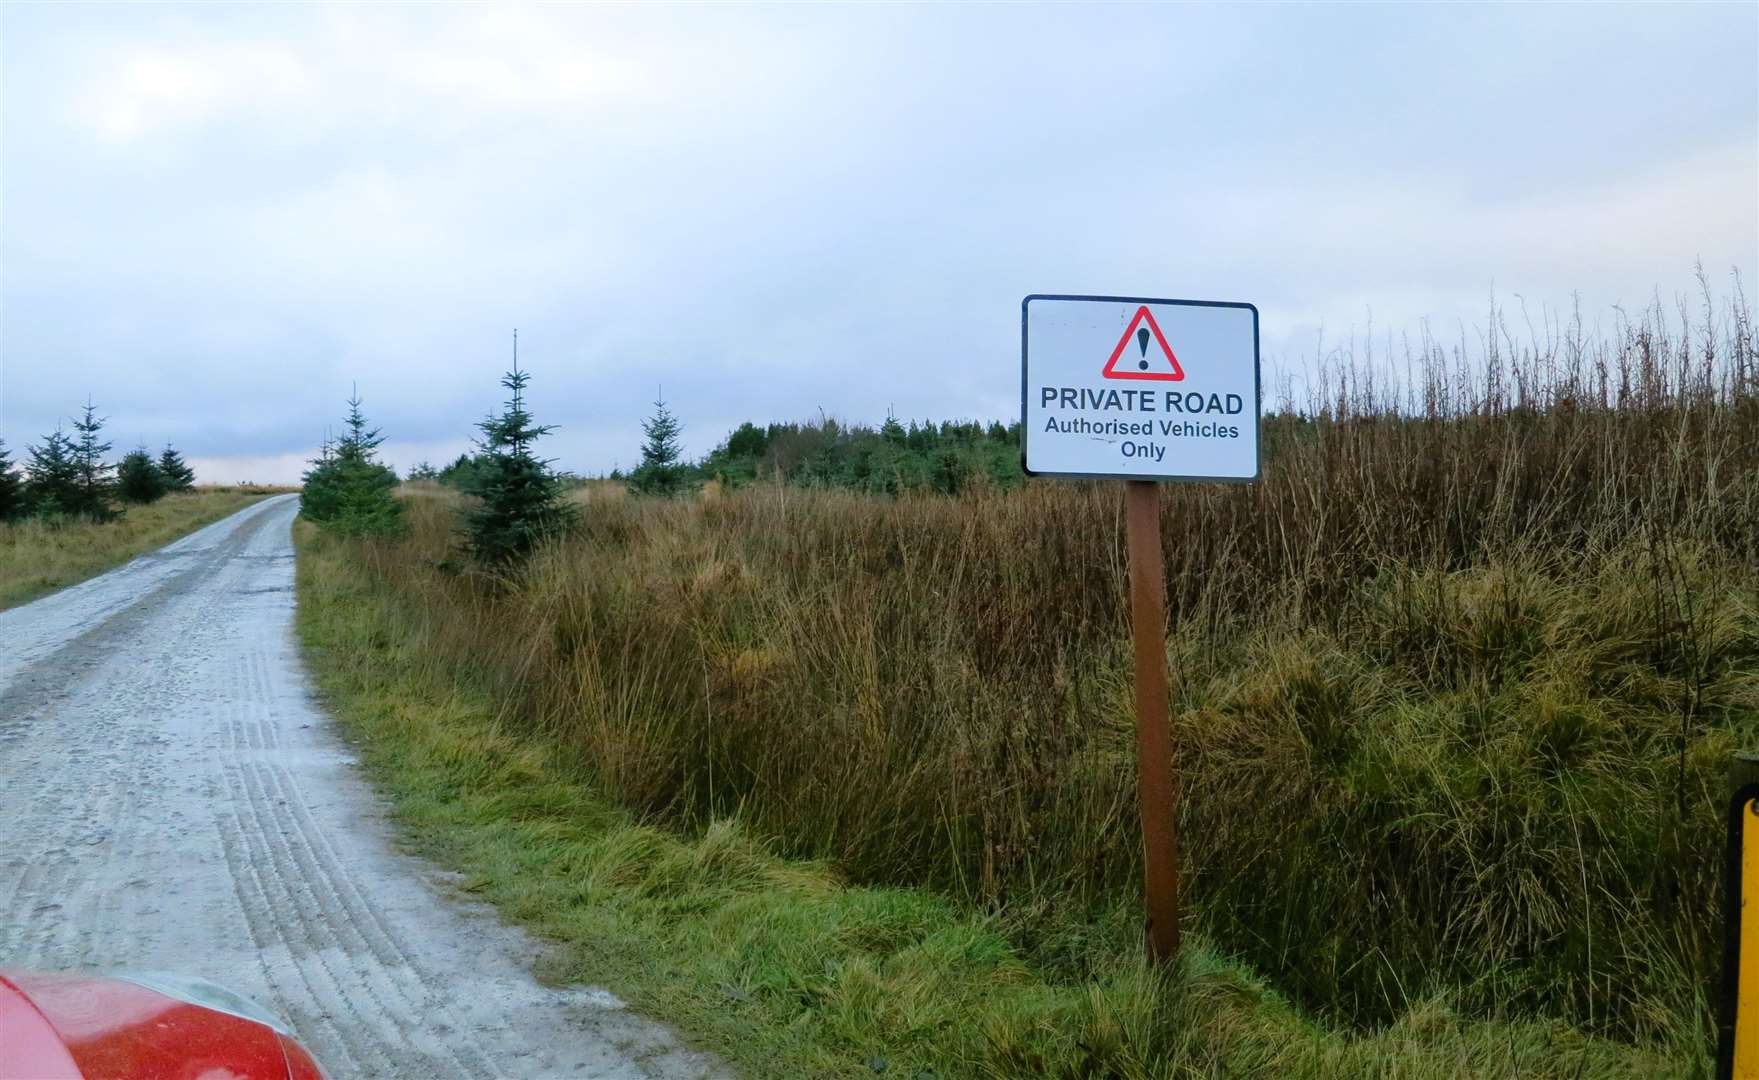 The road to Altnabreac is riddled with potholes and used mainly by lorries carrying timber. The sign says only authorised vehicles may use it. Picture: DGS